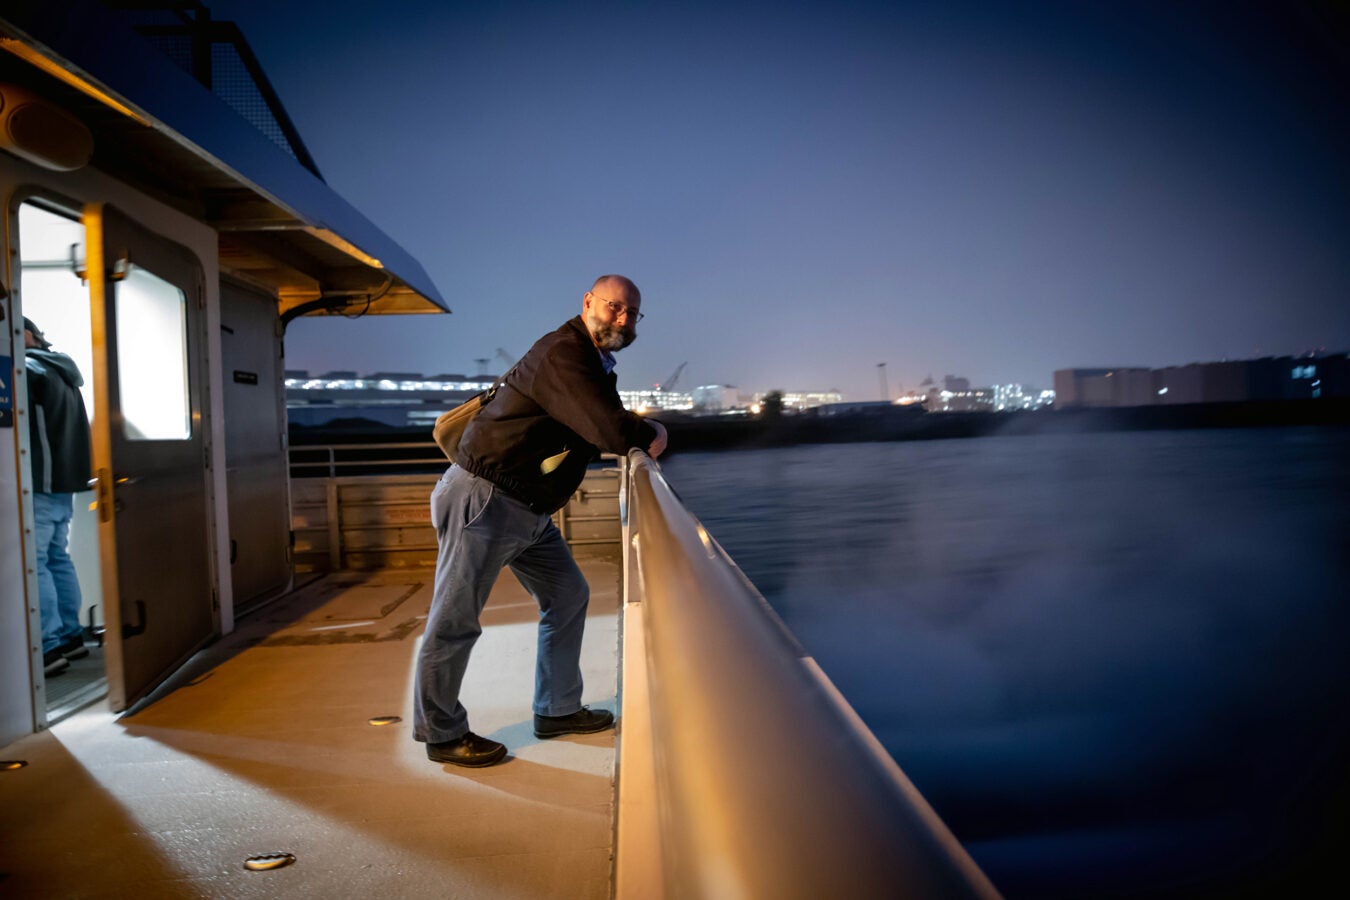 Scott Helms rides the commuter boat to work.